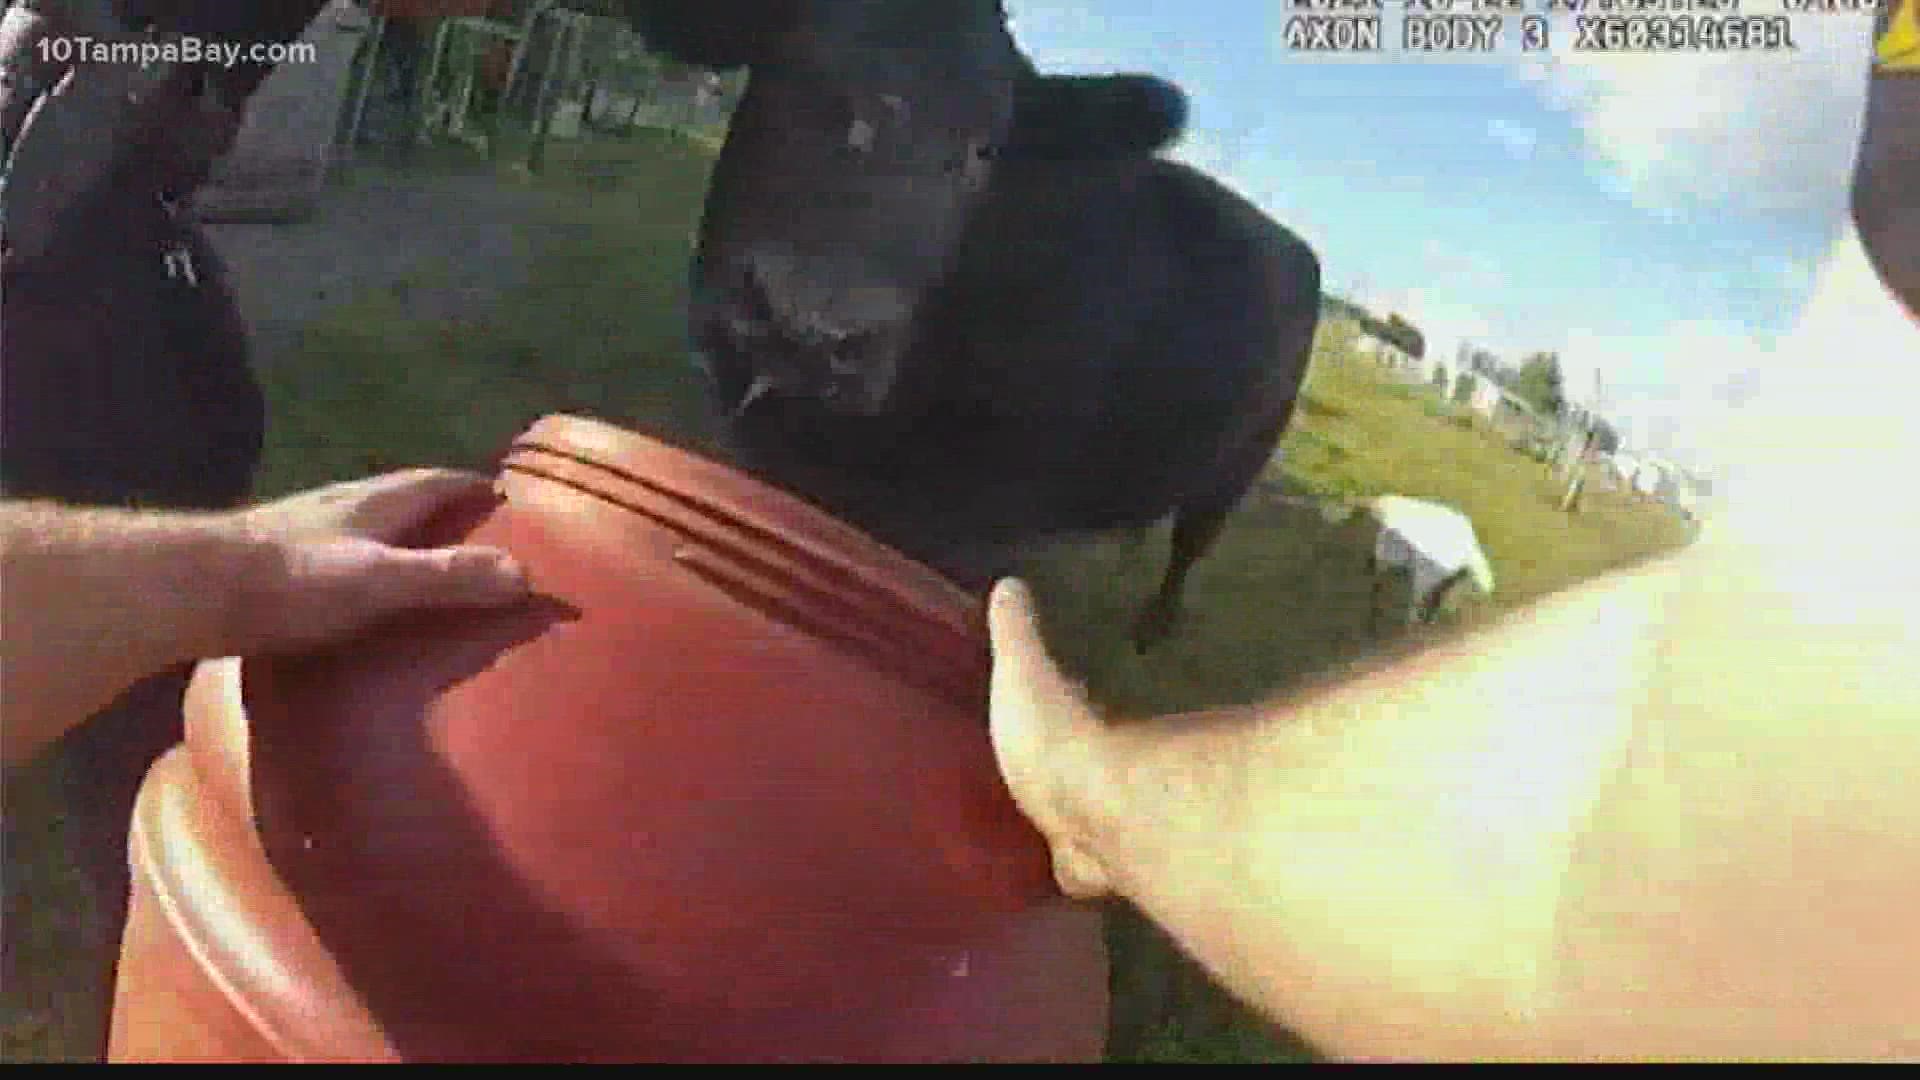 The footage was very MOO-ving.